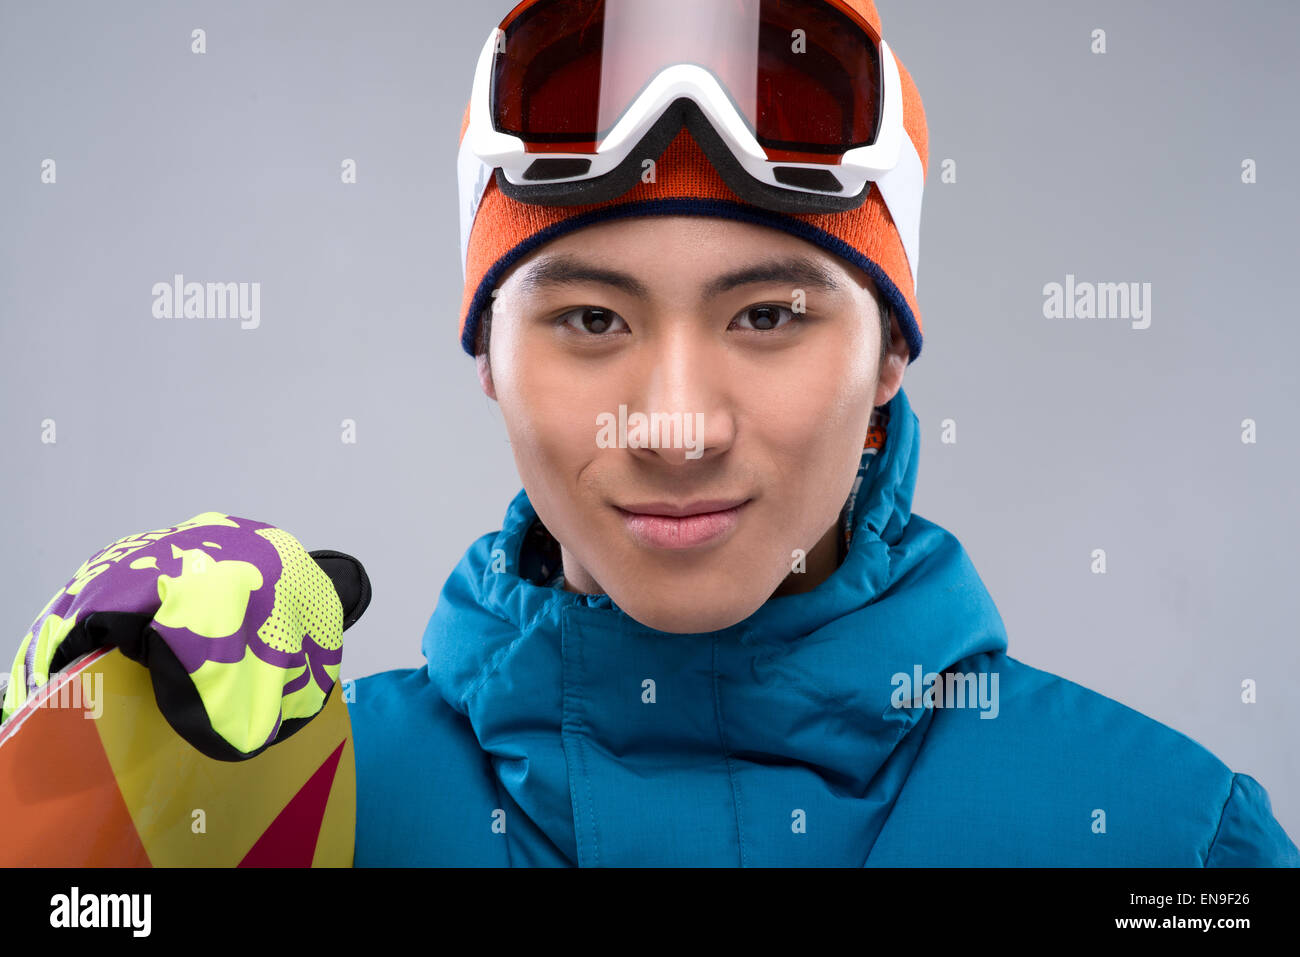 Portrait of a young man holding a snowboard looking at camera Banque D'Images